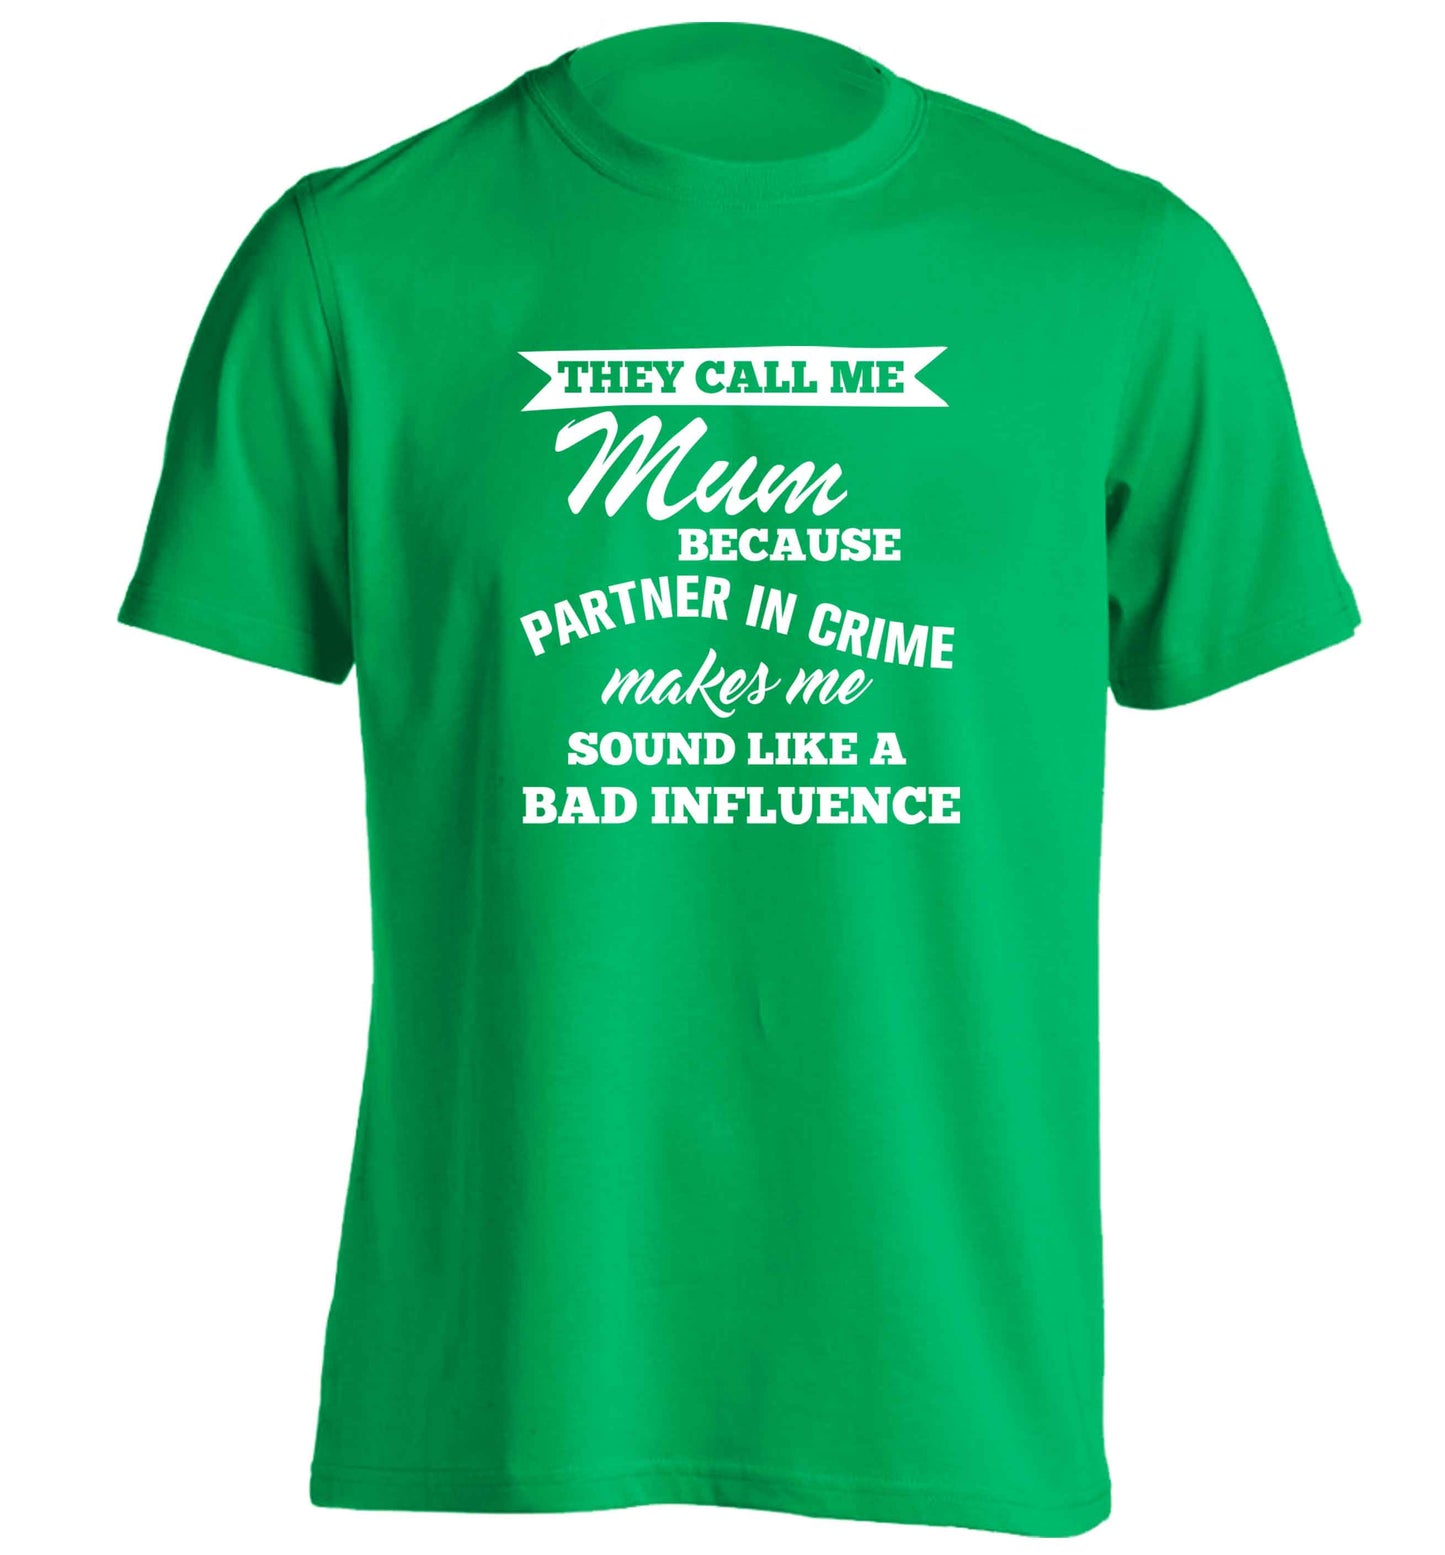 They call me mum because partner in crime makes me sound like a bad influence adults unisex green Tshirt 2XL